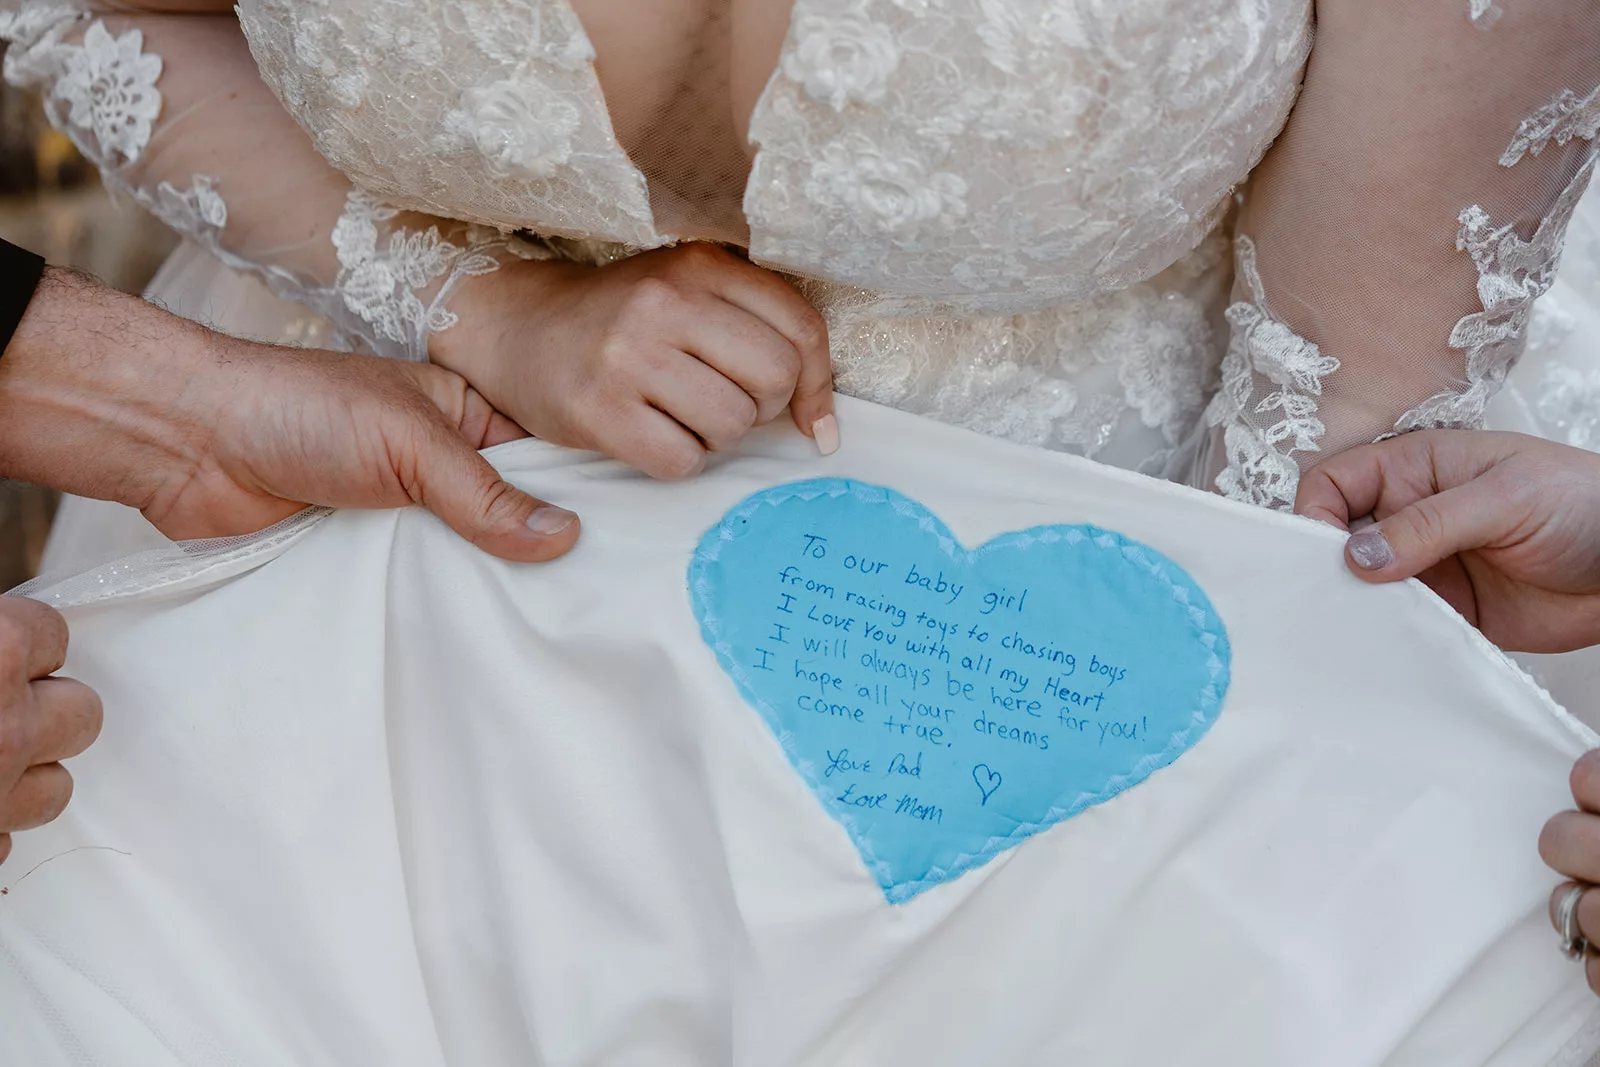 A bride shows off her unique note from her parents, hand stitched into her wedding dress 